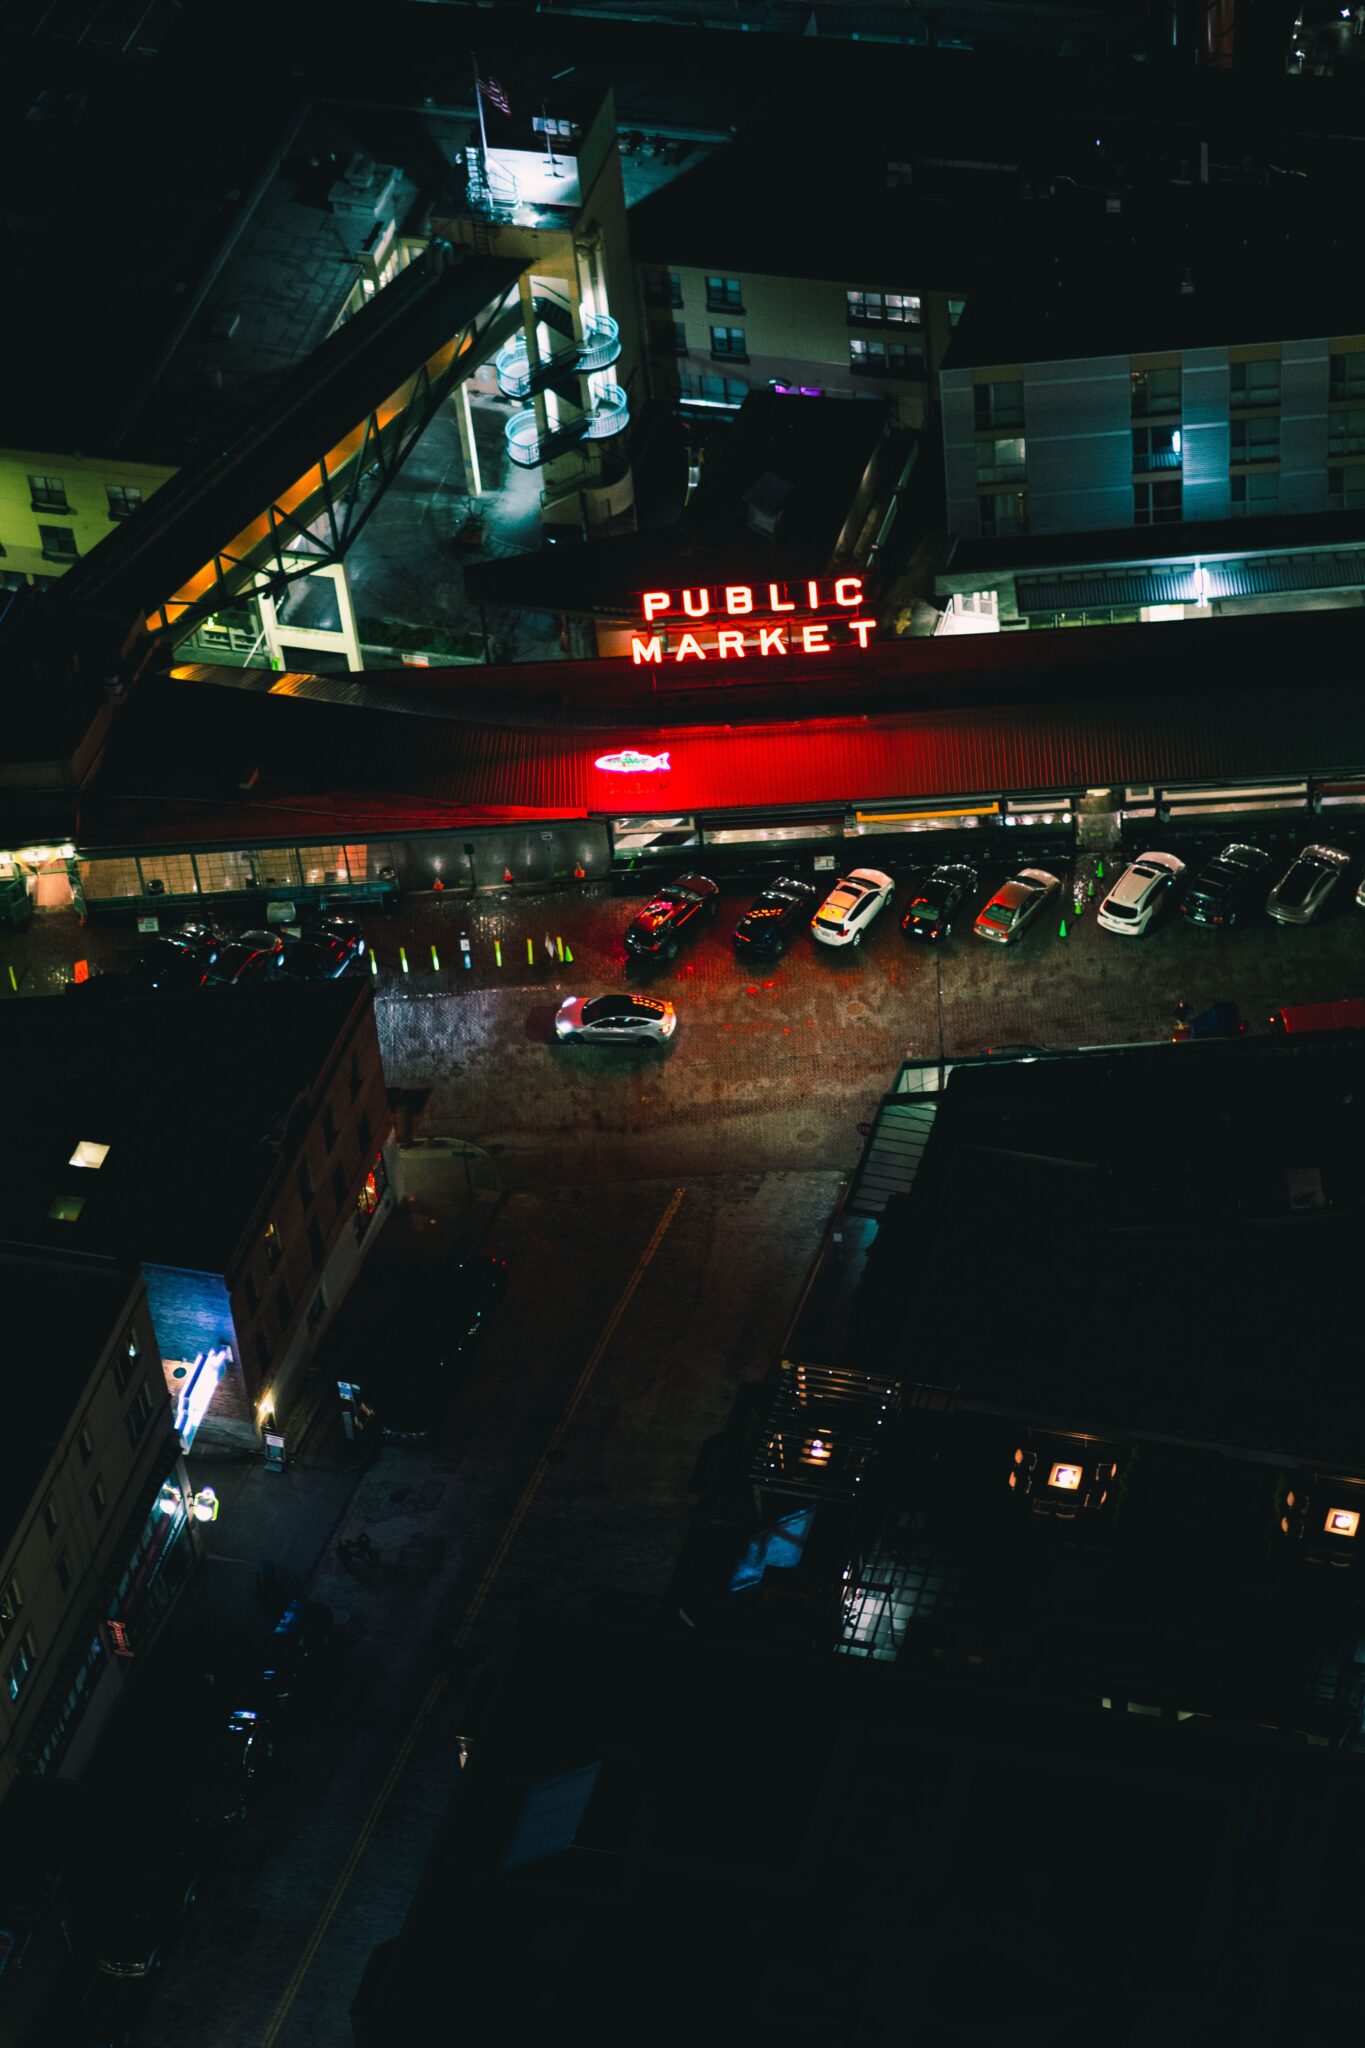 nighttime photo of the outside of Public Market in Seattle with the name lit up in red.